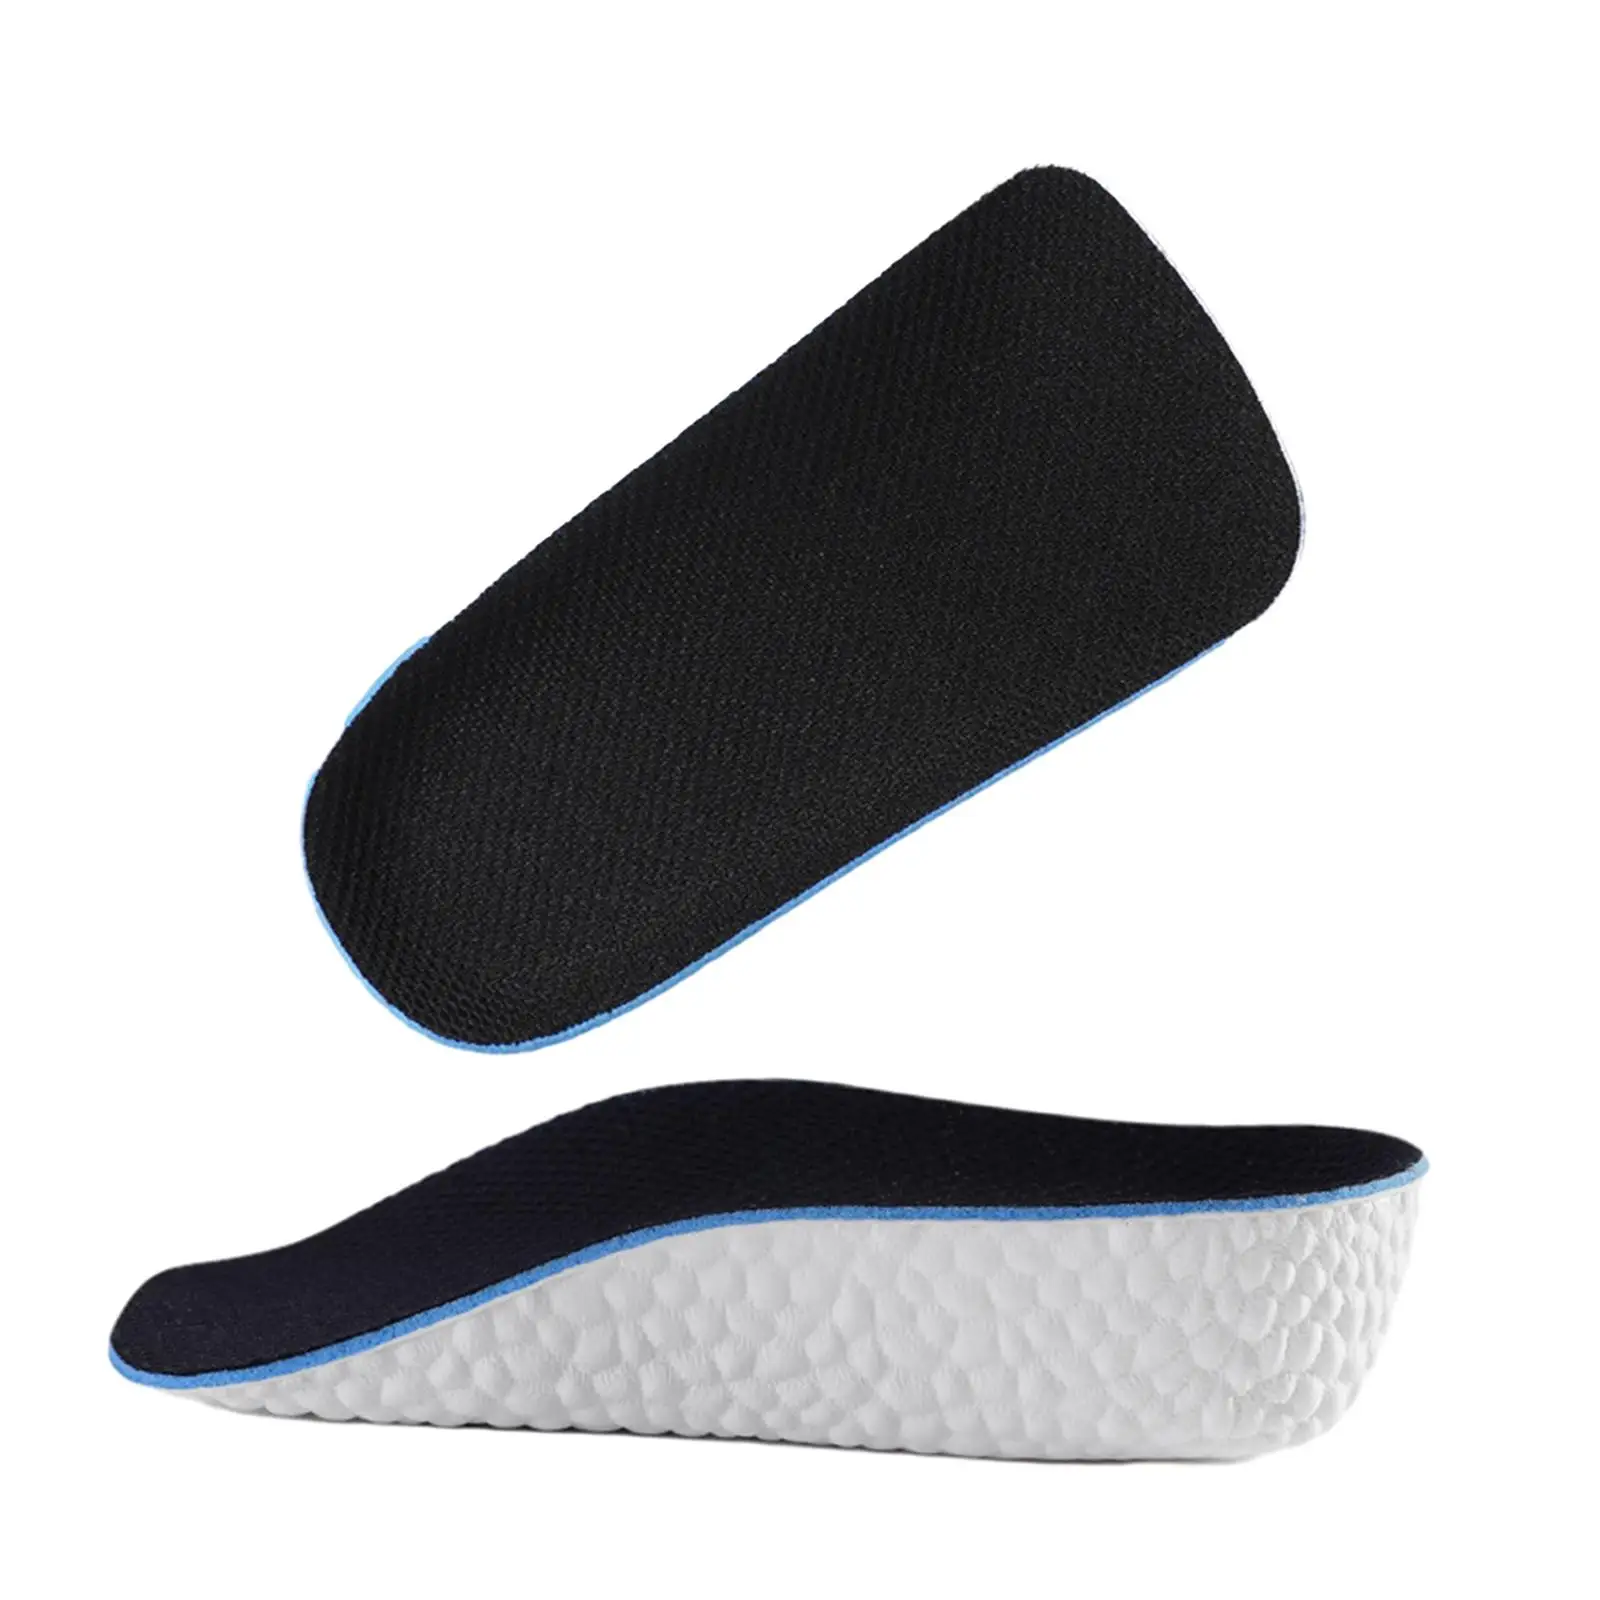 2 Pieces Height Increase Insoles Half Insert Soft Invisible for Men and Women for Running High Heels Sneakers Walking Hiking